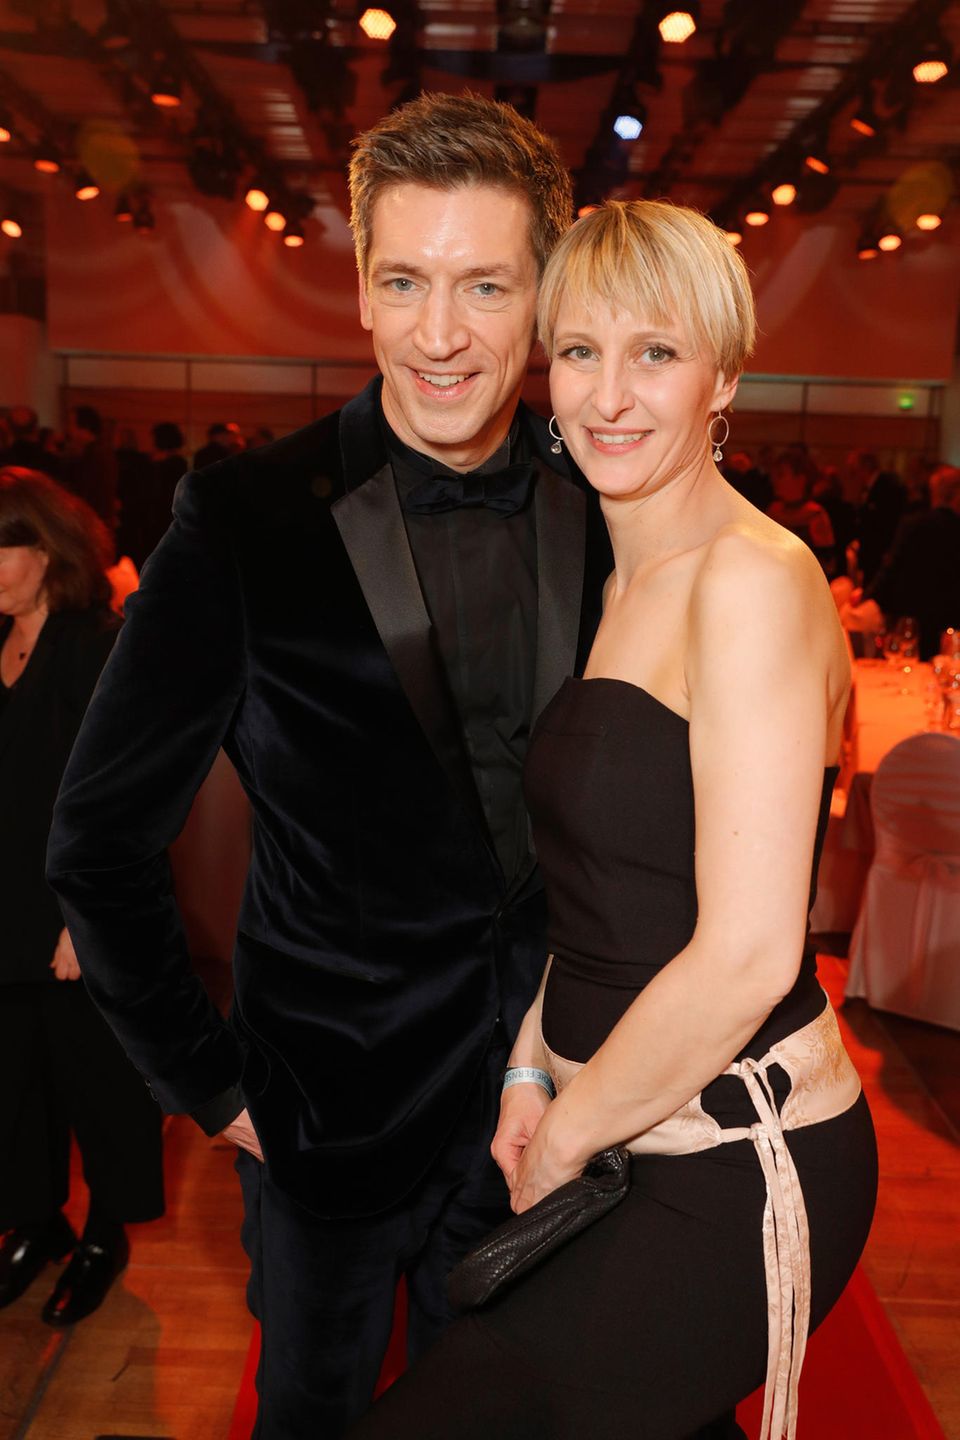 Steffen Hallaschka and his wife Anne at the German TV Awards 2017.